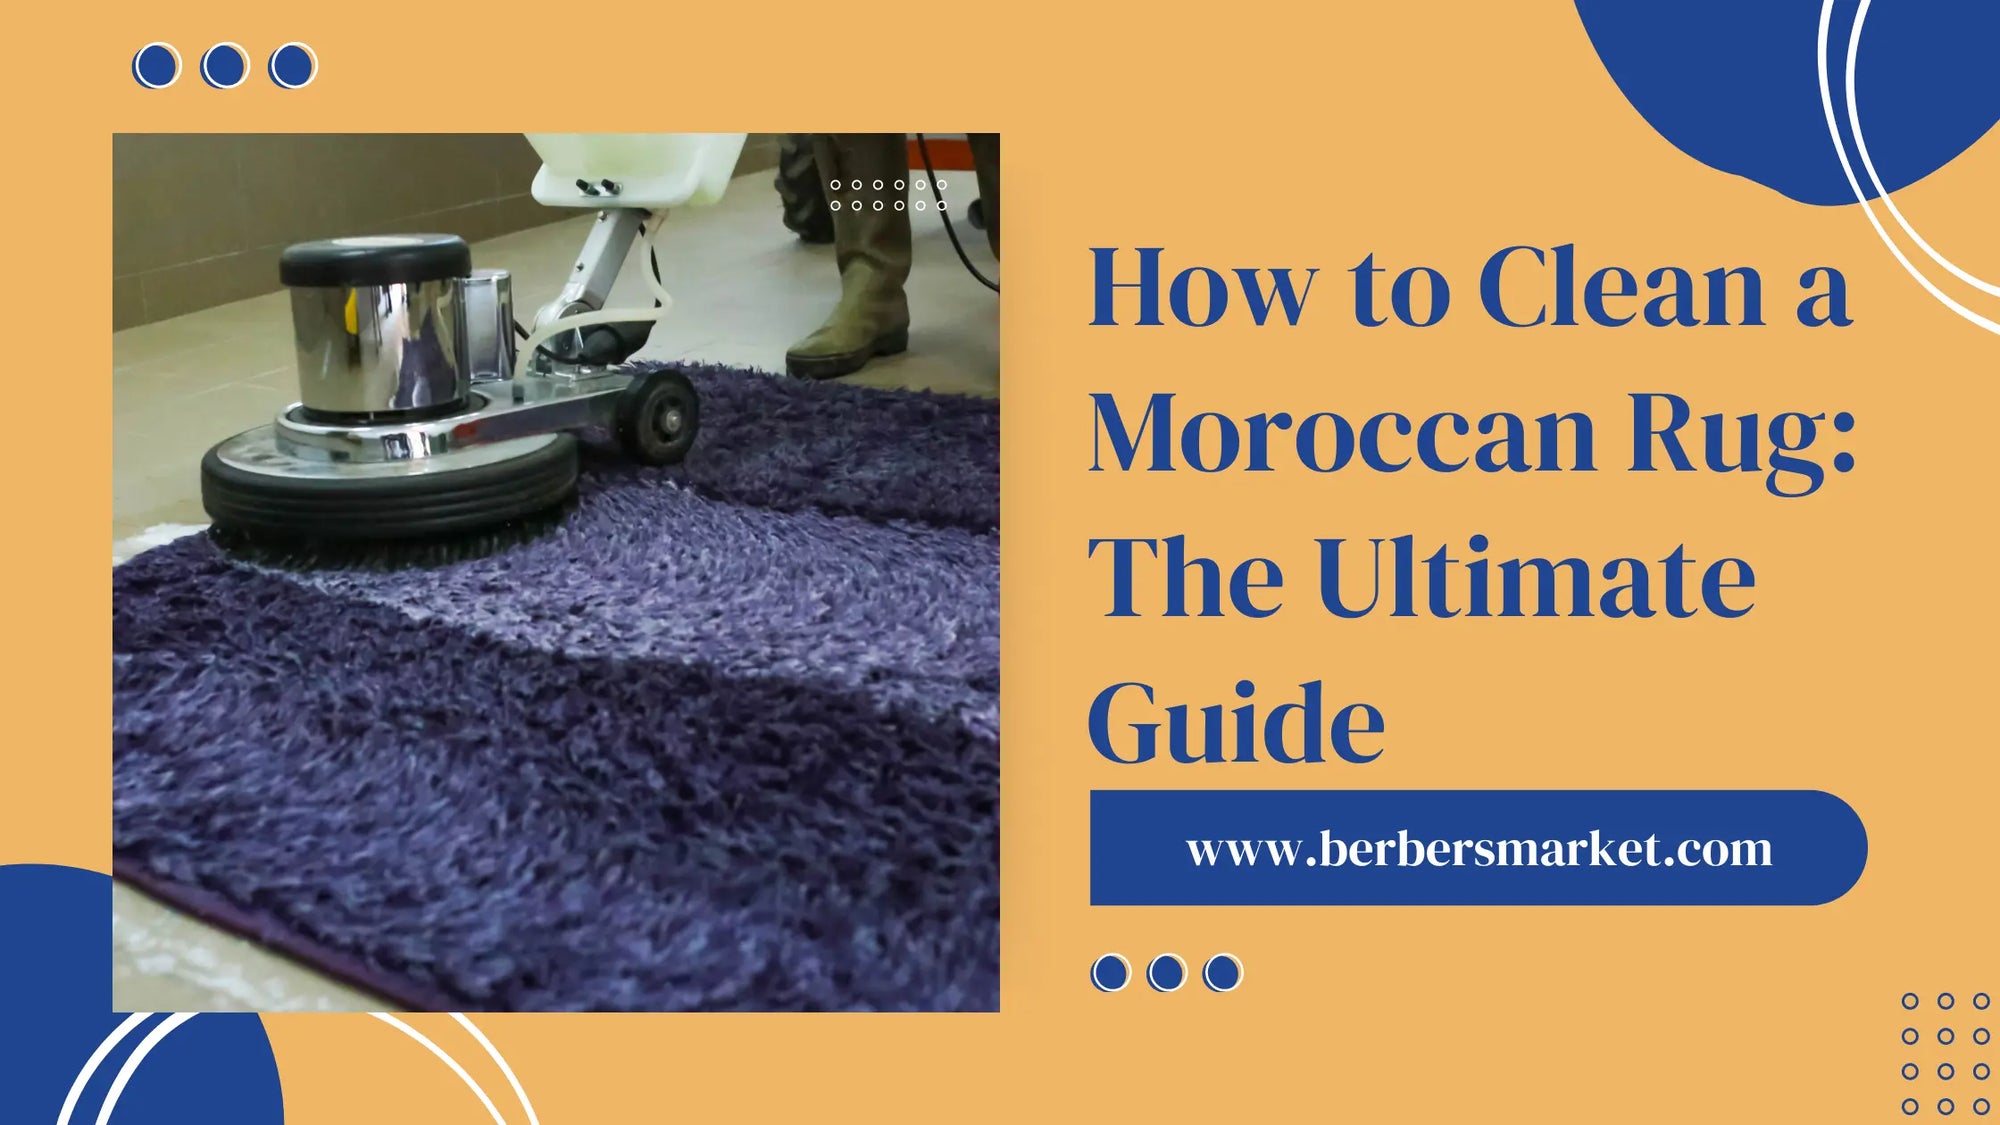 Blog banner talking about: "How to Clean a Moroccan Rug: The Ultimate Guide" with a picture showing a professional rug cleaning.